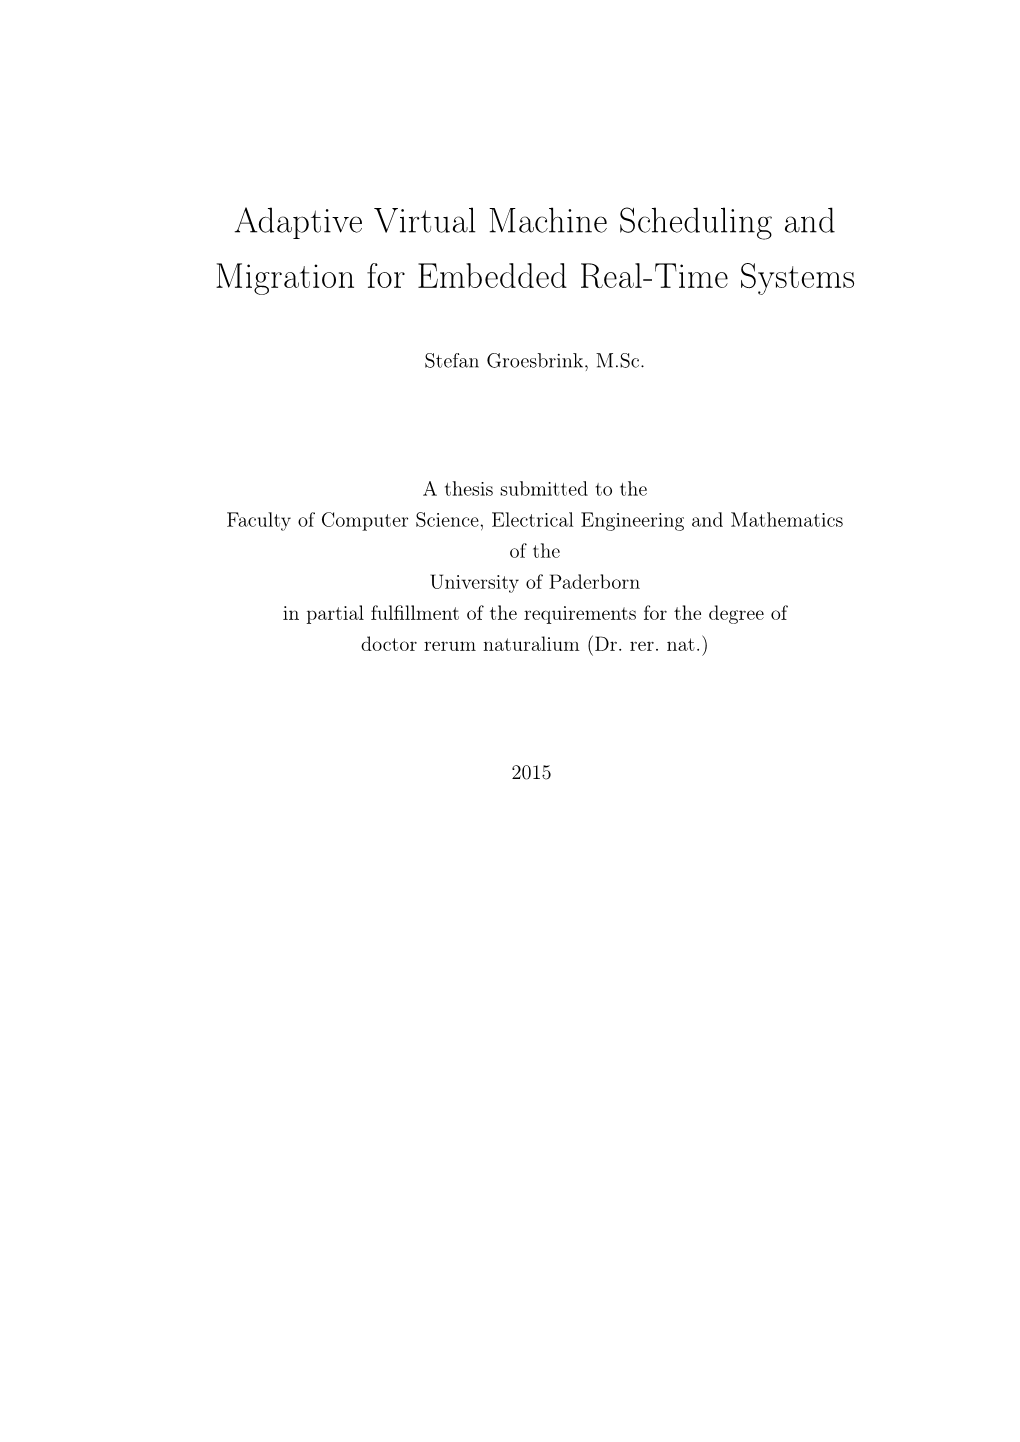 Adaptive Virtual Machine Scheduling and Migration for Embedded Real-Time Systems